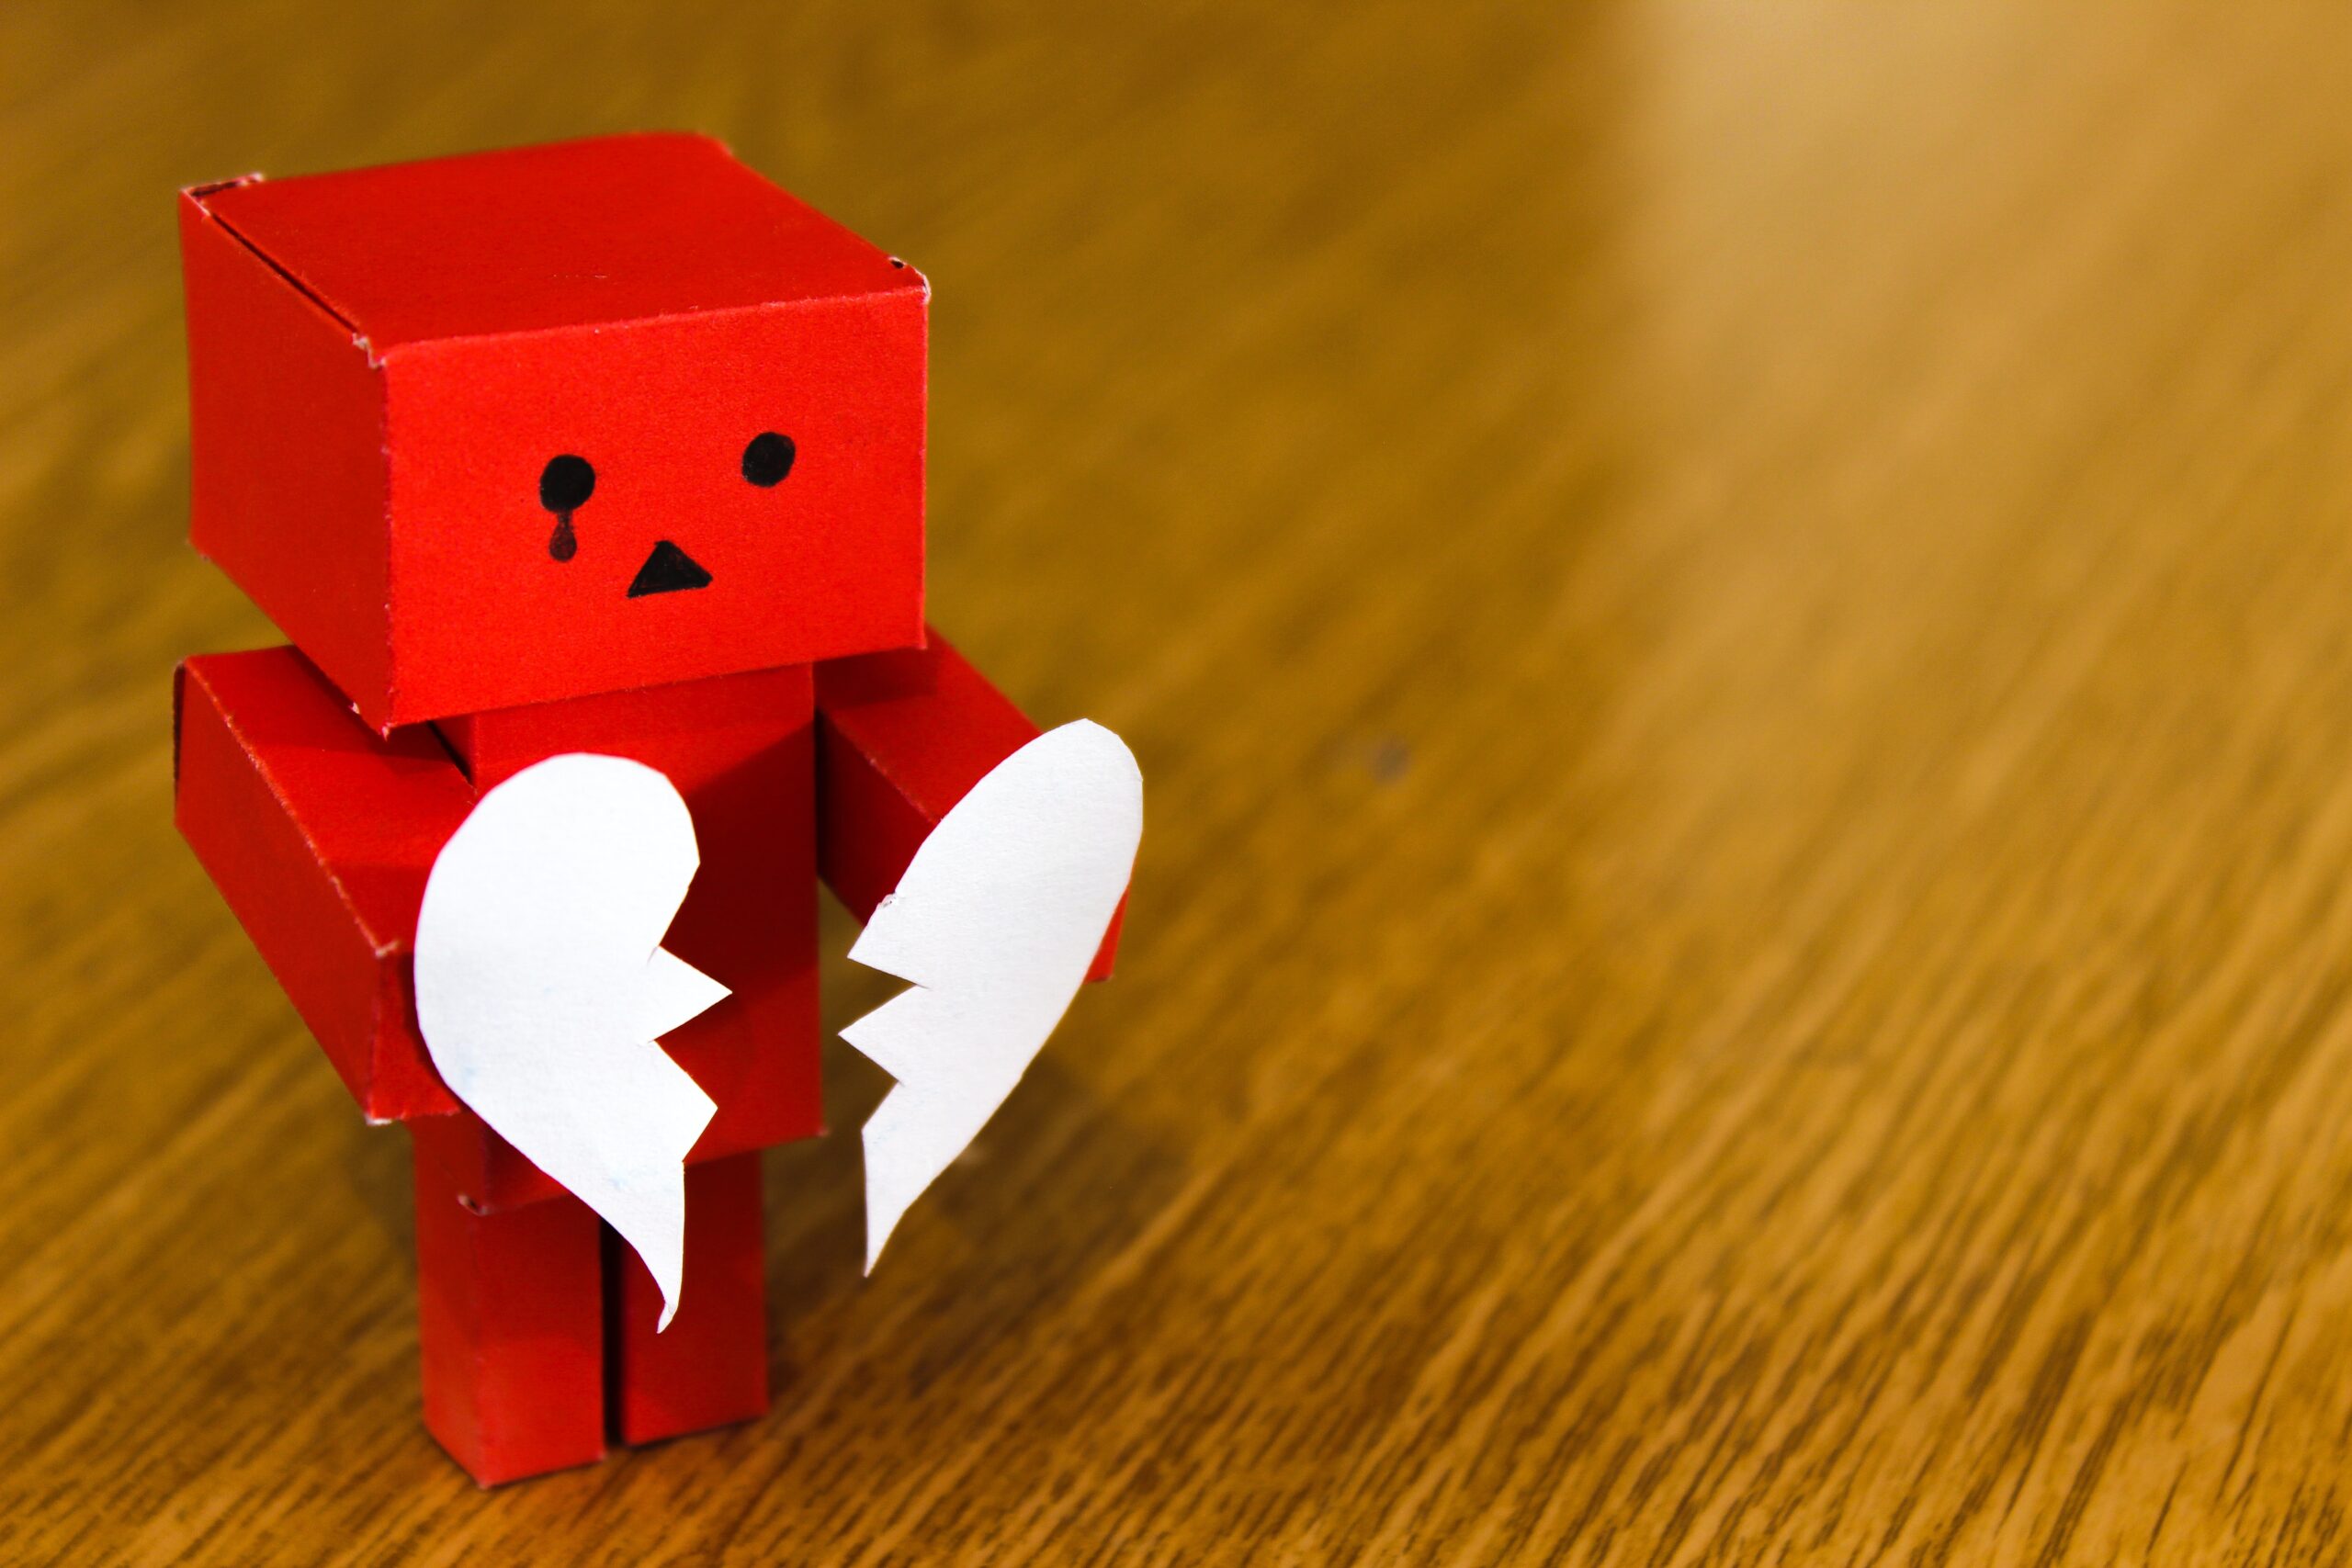 why don't my relationships last? emotional abandonment and emotional availability